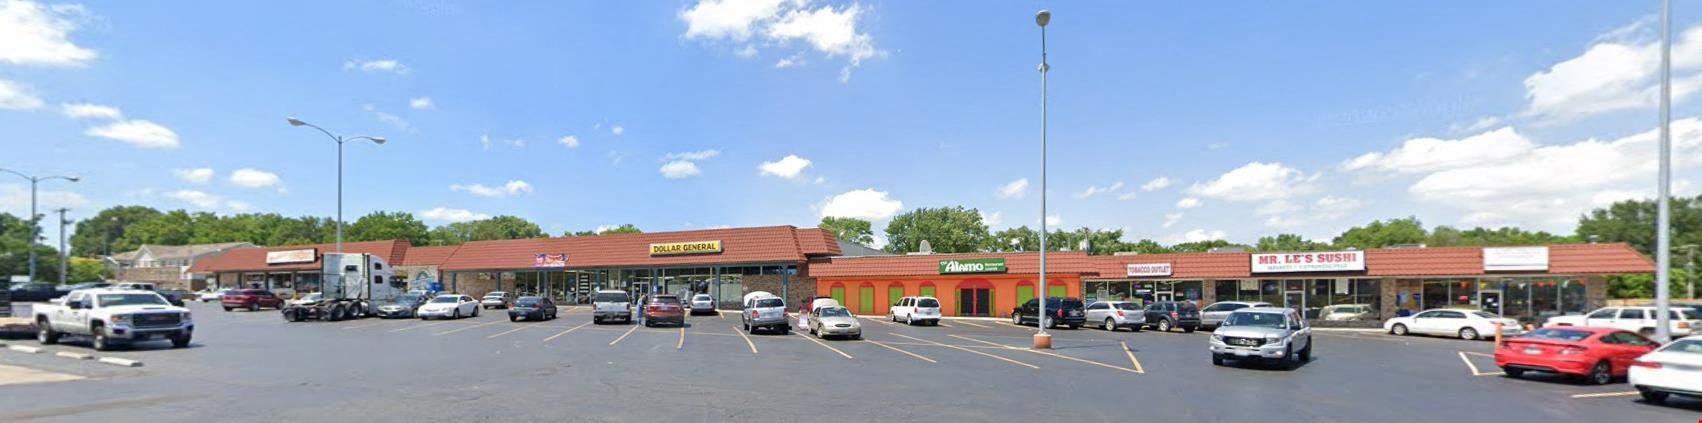 Holiday Hills Shopping Center